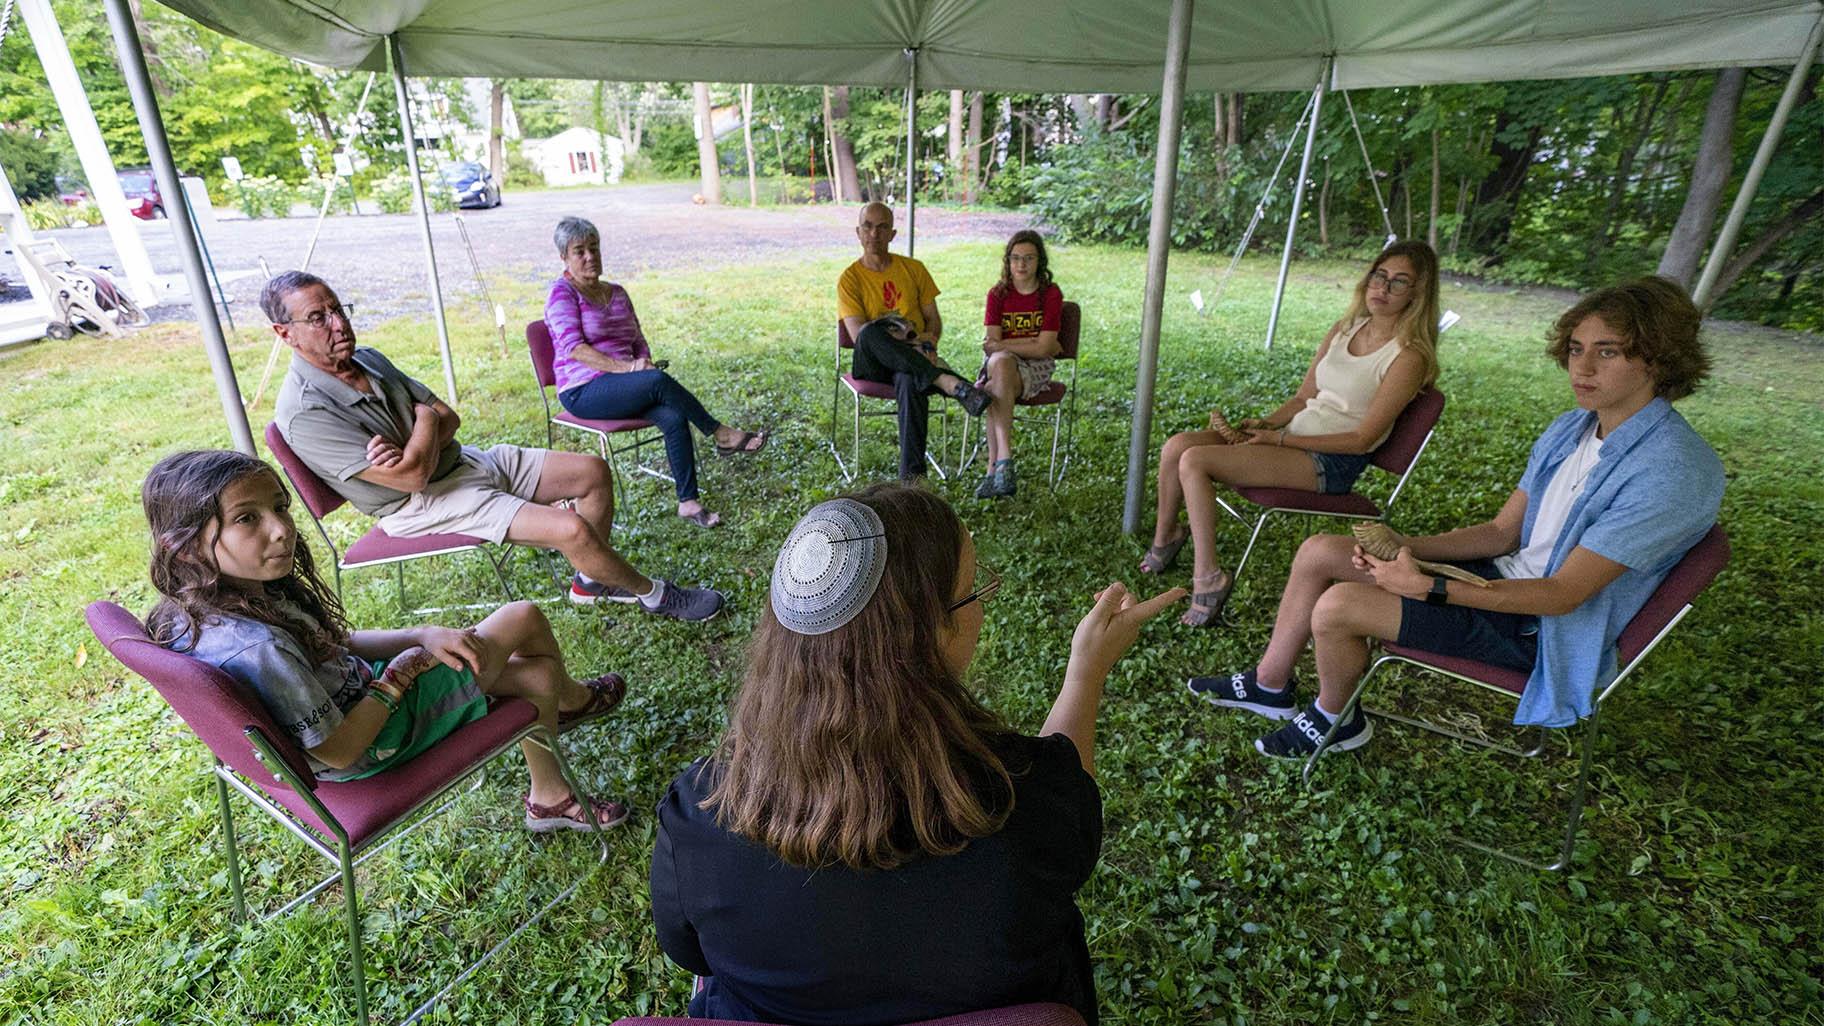 Rabbi Erica Asch, foreground center, teaches a class under a tent set upon outside Temple Beth El, Monday, Aug. 30, 2021, in Augusta, Maine. The recent COVID-19 upsurge has prompted the synagogue to erected a tent outside the temple to accommodate worshippers during the upcoming services. (AP Photo / Robert F. Bukaty)